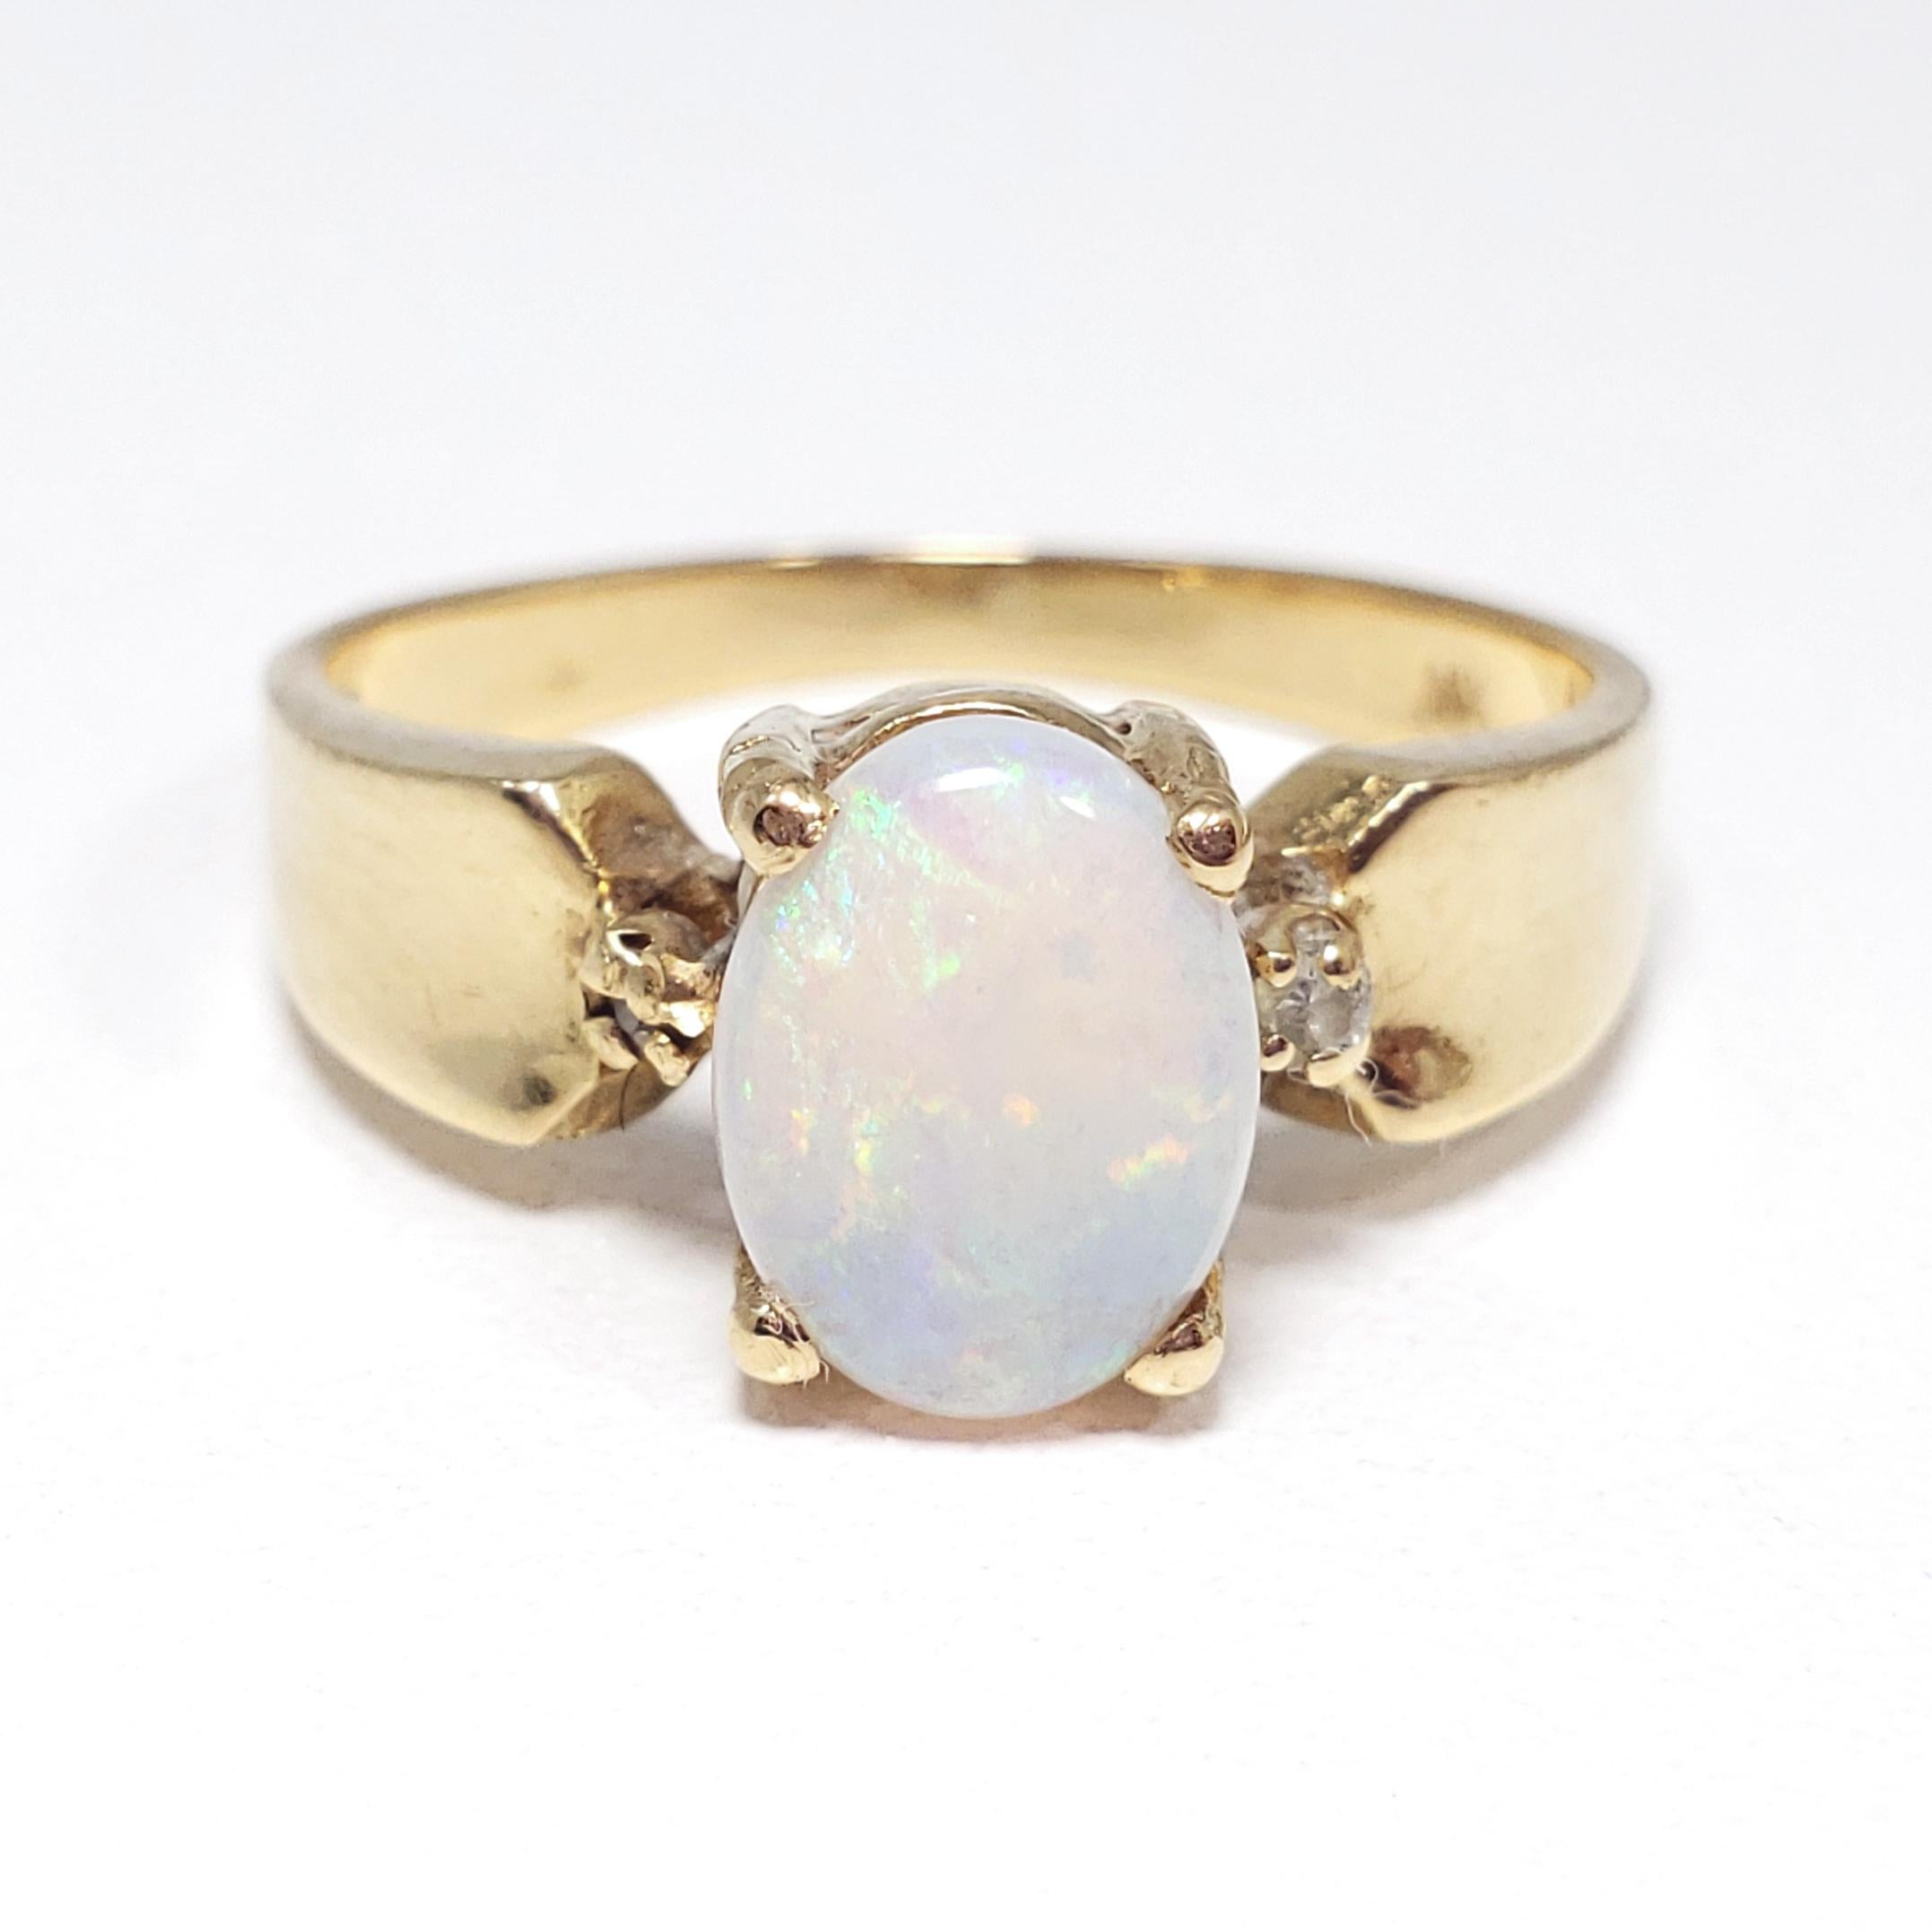 A stylish minimalist ring featuring a precious white-body opal accented with two .01ct diamonds on each side, set on a tapered 14K gold band. Beautiful play-of-color in the opal, which is prong-set in an elevated setting.

Ring Size: US 6
Opal